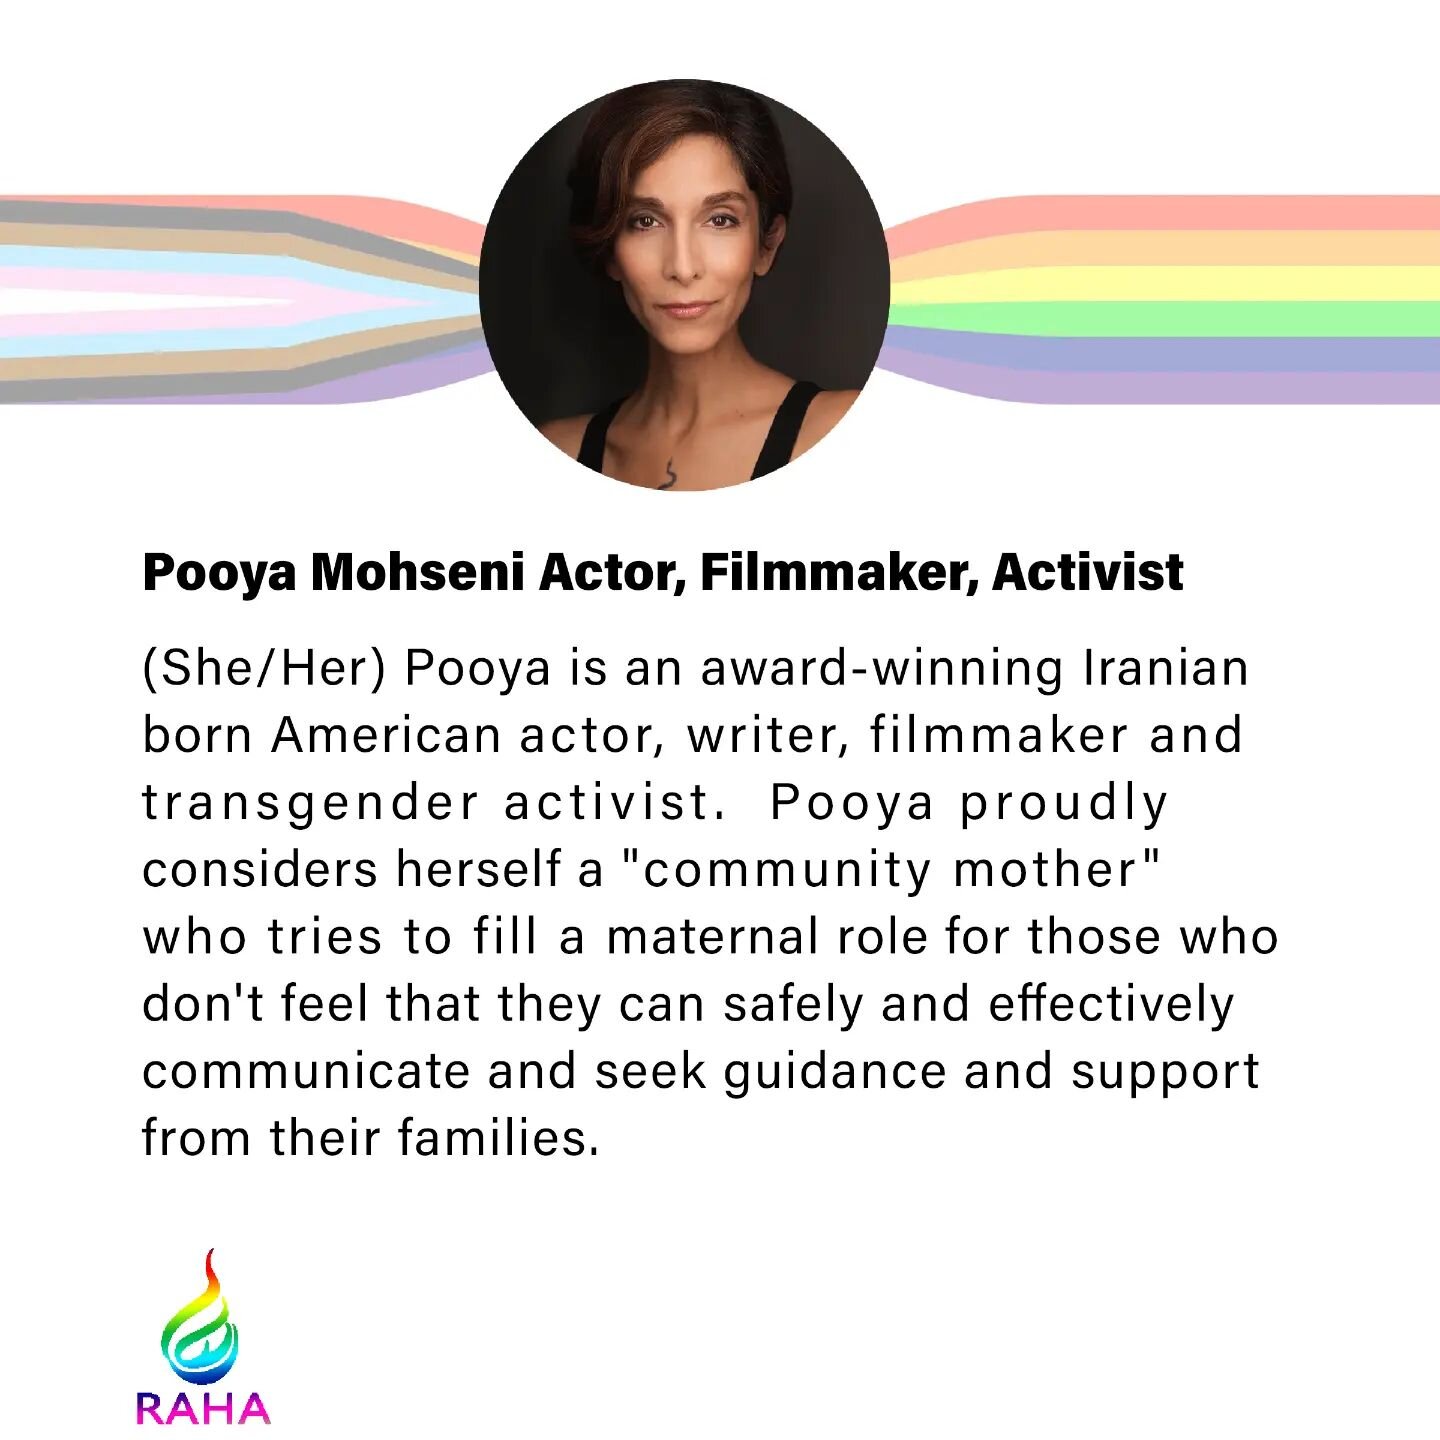 Get your ticket now ***Link in Bio*** for our panel event this Sunday February 12, 2023.

Panelist:
Pooya Mohseni, Actor, Filmmaker, Activist (She/Her) Pooya is an award-winning Iranian born American actor, writer, filmmaker and transgender activist.